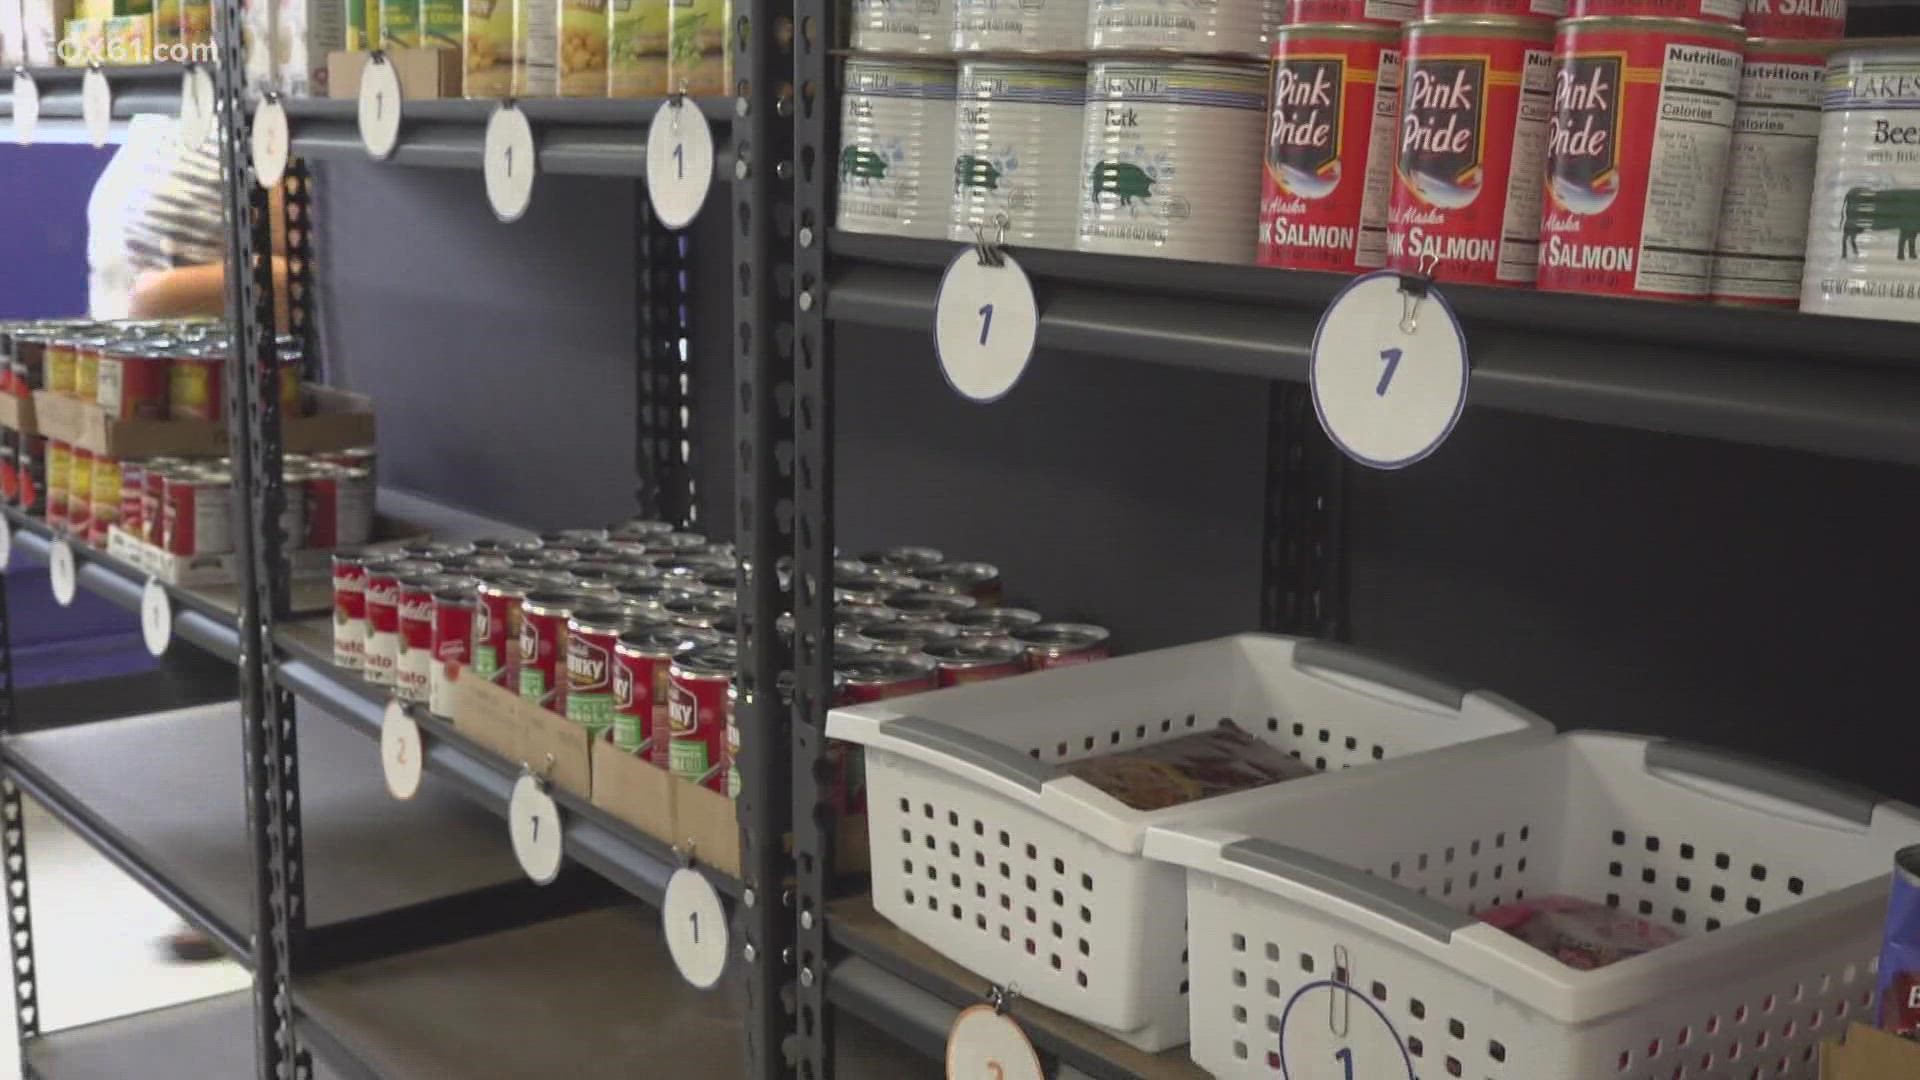 Those who work in the food pantry said they have seen a 50% increase in clients.